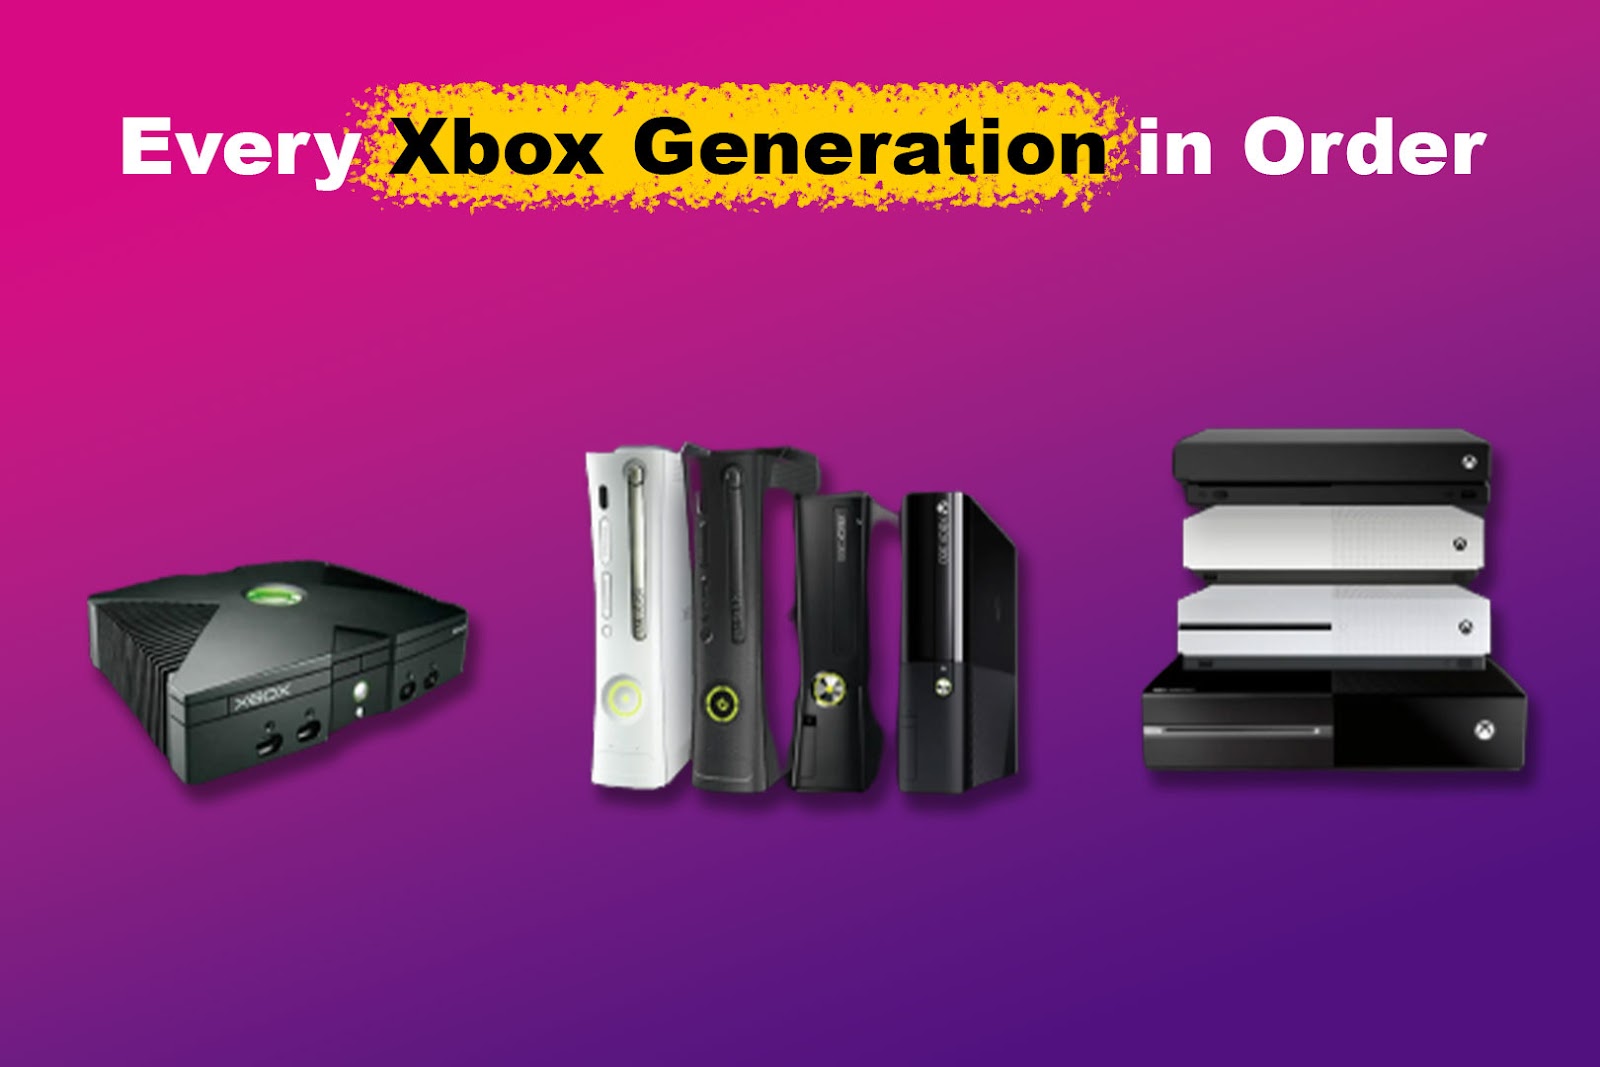 Every Xbox Generation in Order